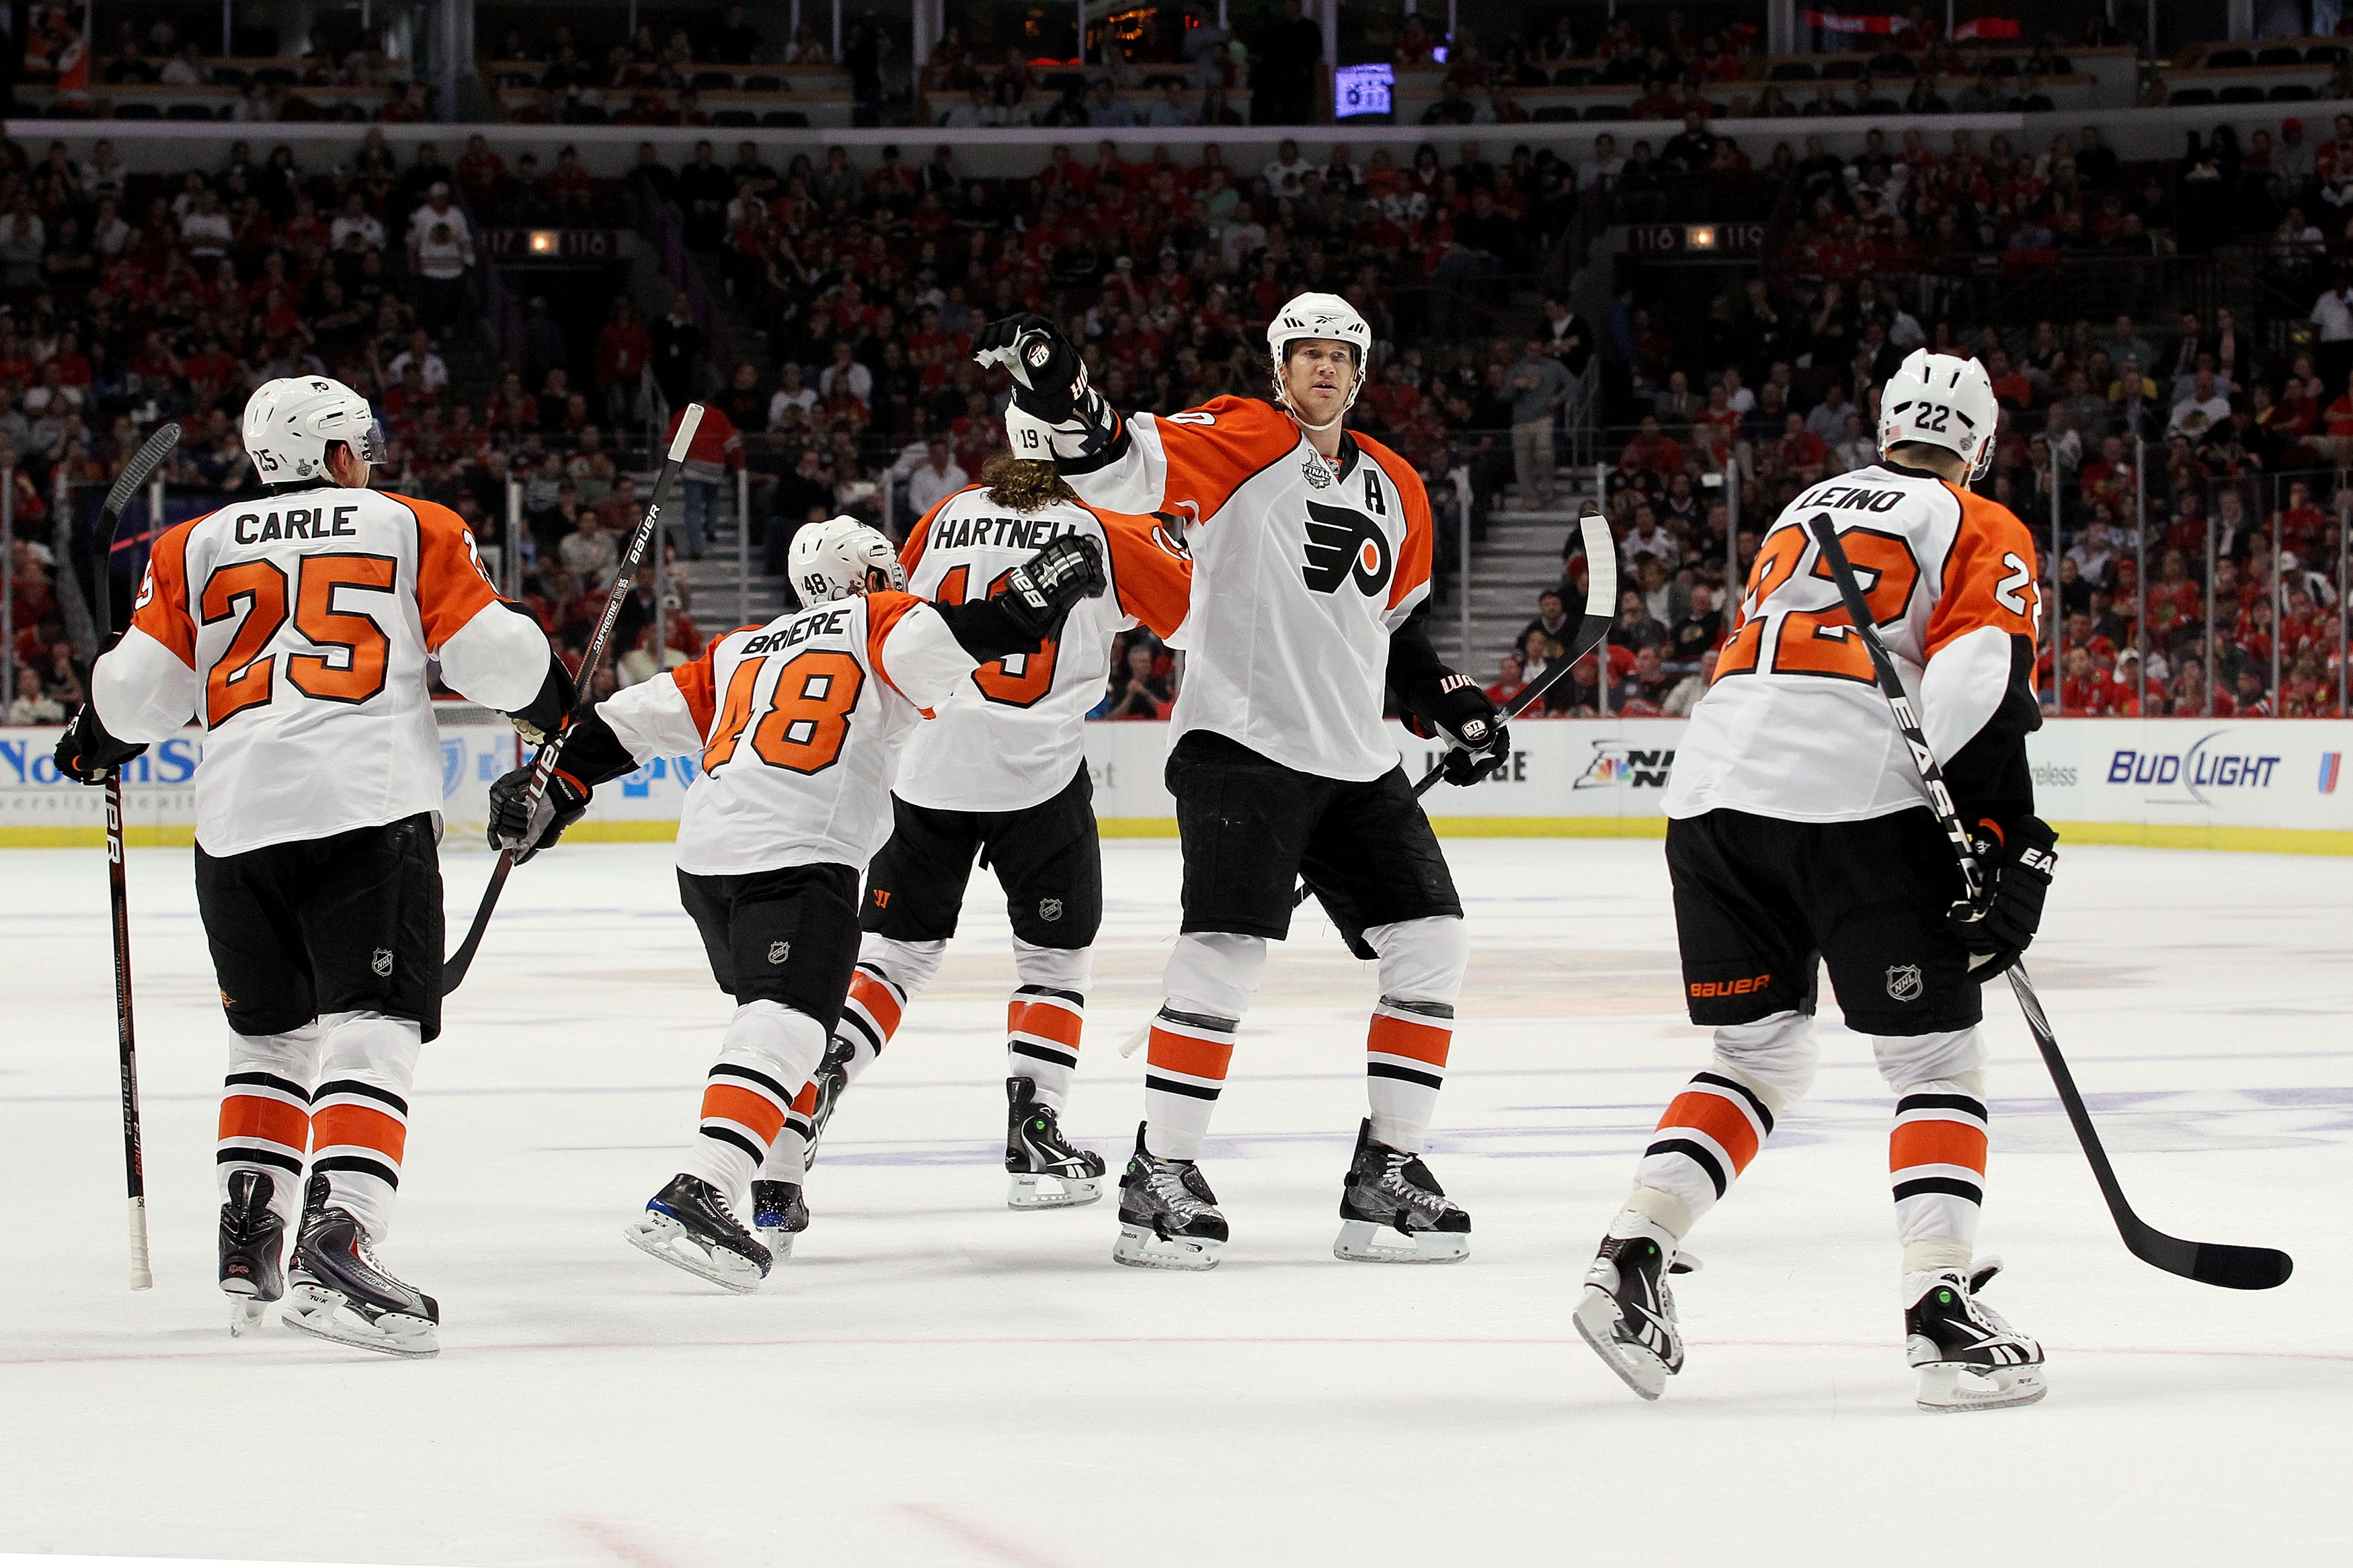 Flyers' Pronger out for season, playoffs with concussion